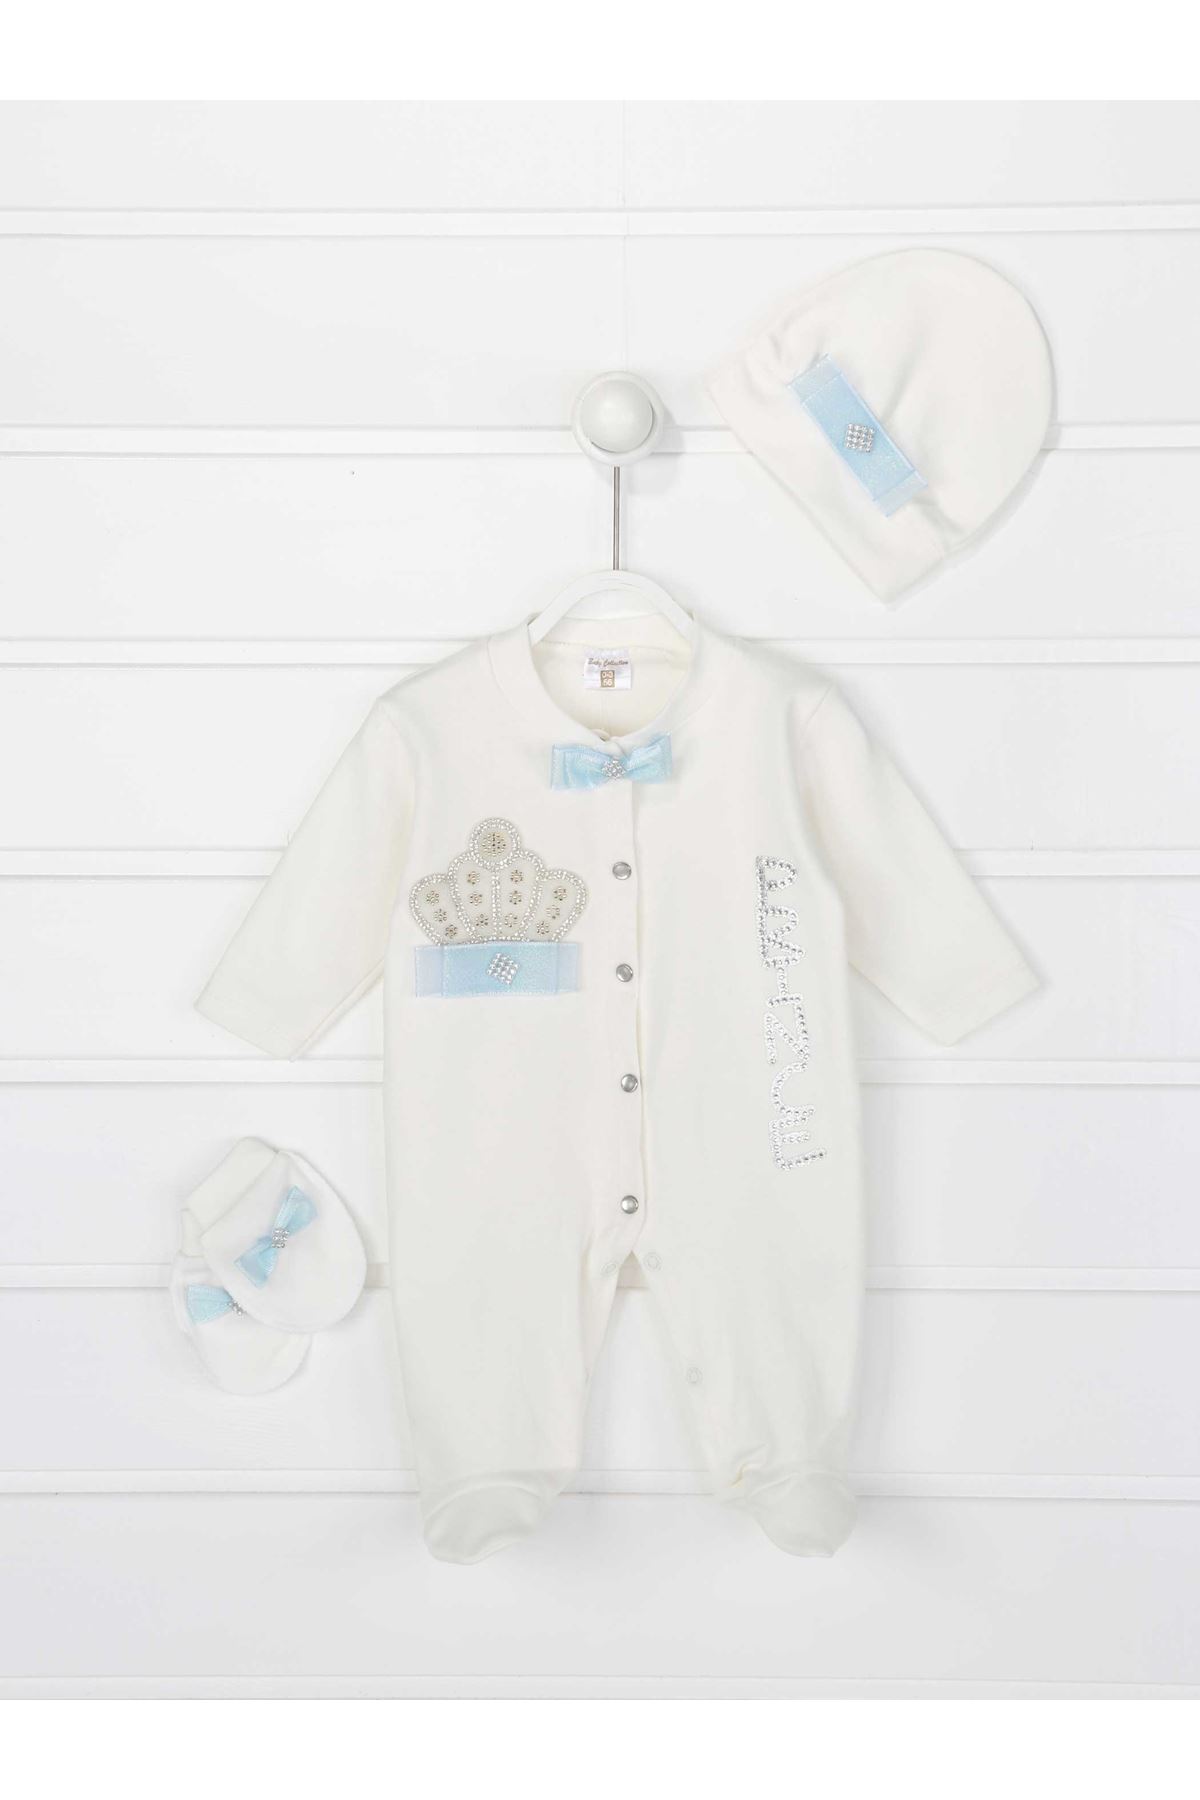 Blue King Crowned Prince Boy Baby 3 Piece RompersBlue King Crowned Prince Boy Baby 3 PCs Rompers